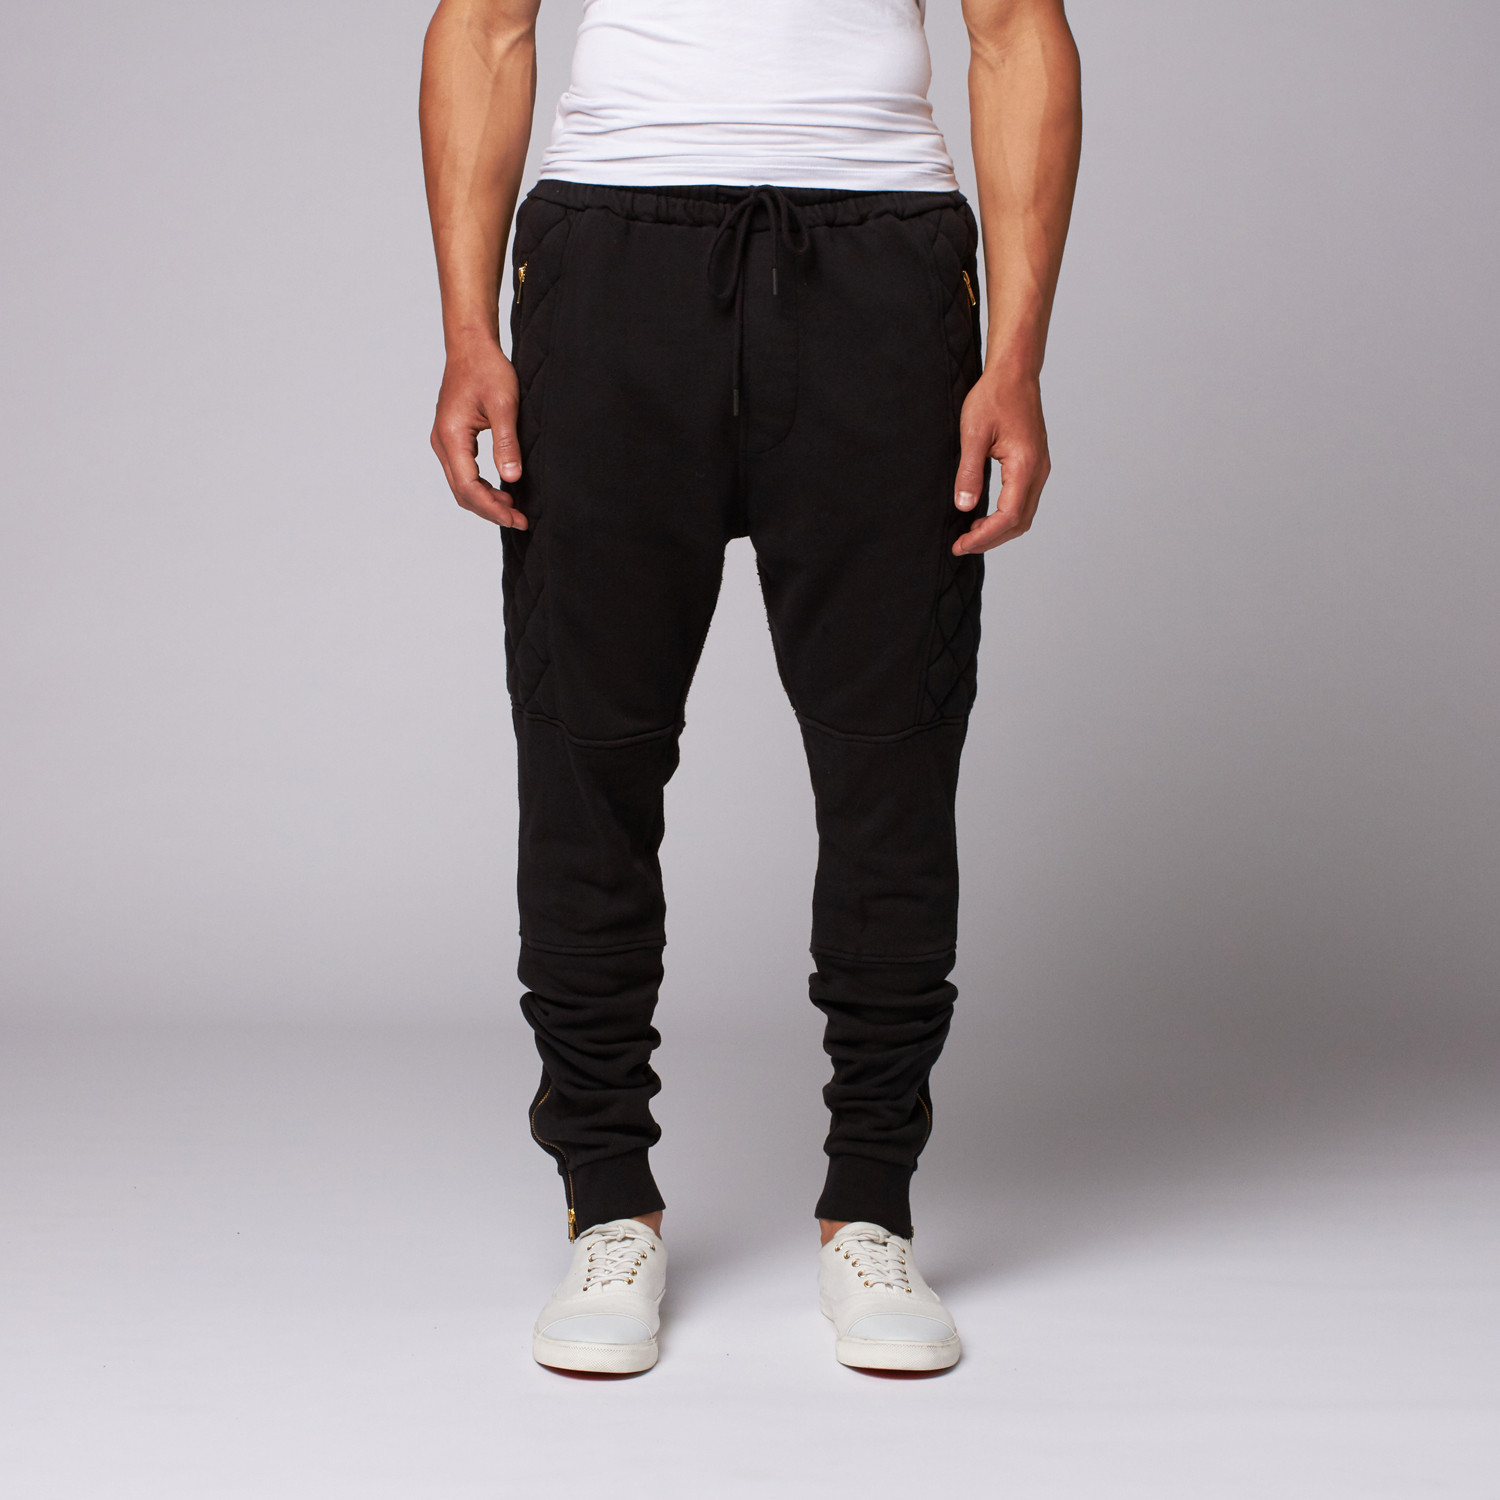 Ransom Quilted Detail Sweatpants // Jet Black (S) - Religion Apparel ...